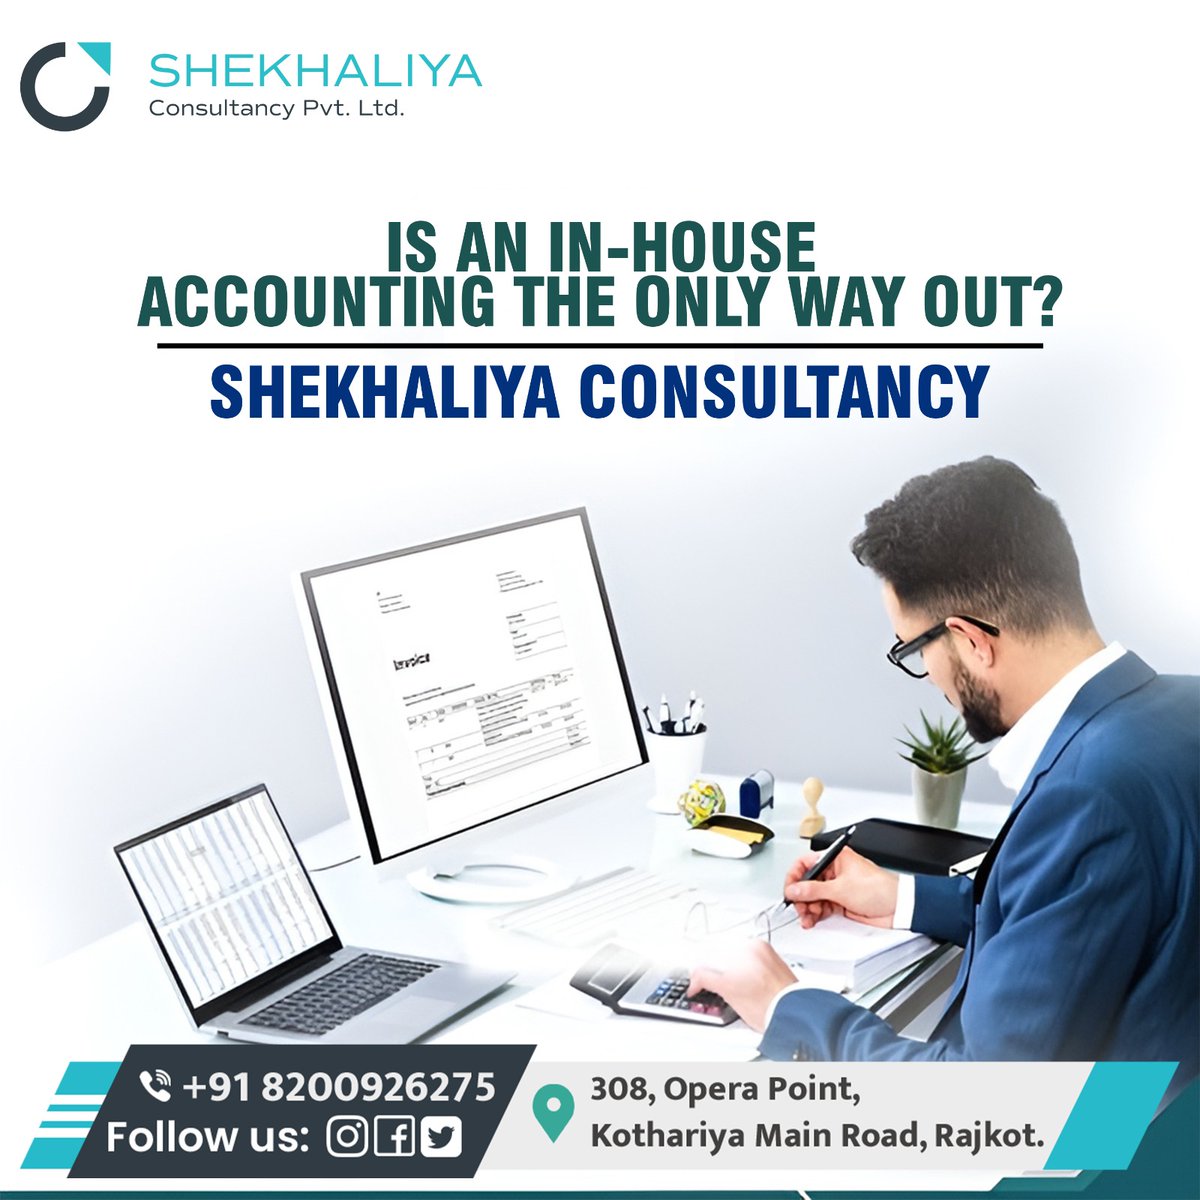 Need Help With Tax Planning Services ?
call now:- 082009 26275
.
.
.
#shekhaliyaconsultancy #consultancyservices #consultancyagency #loanservices #quickloan #quickloans #accountingandfinance #accountingservice #itreturn #itreturns #gstupdates #auditservices #auditingservices